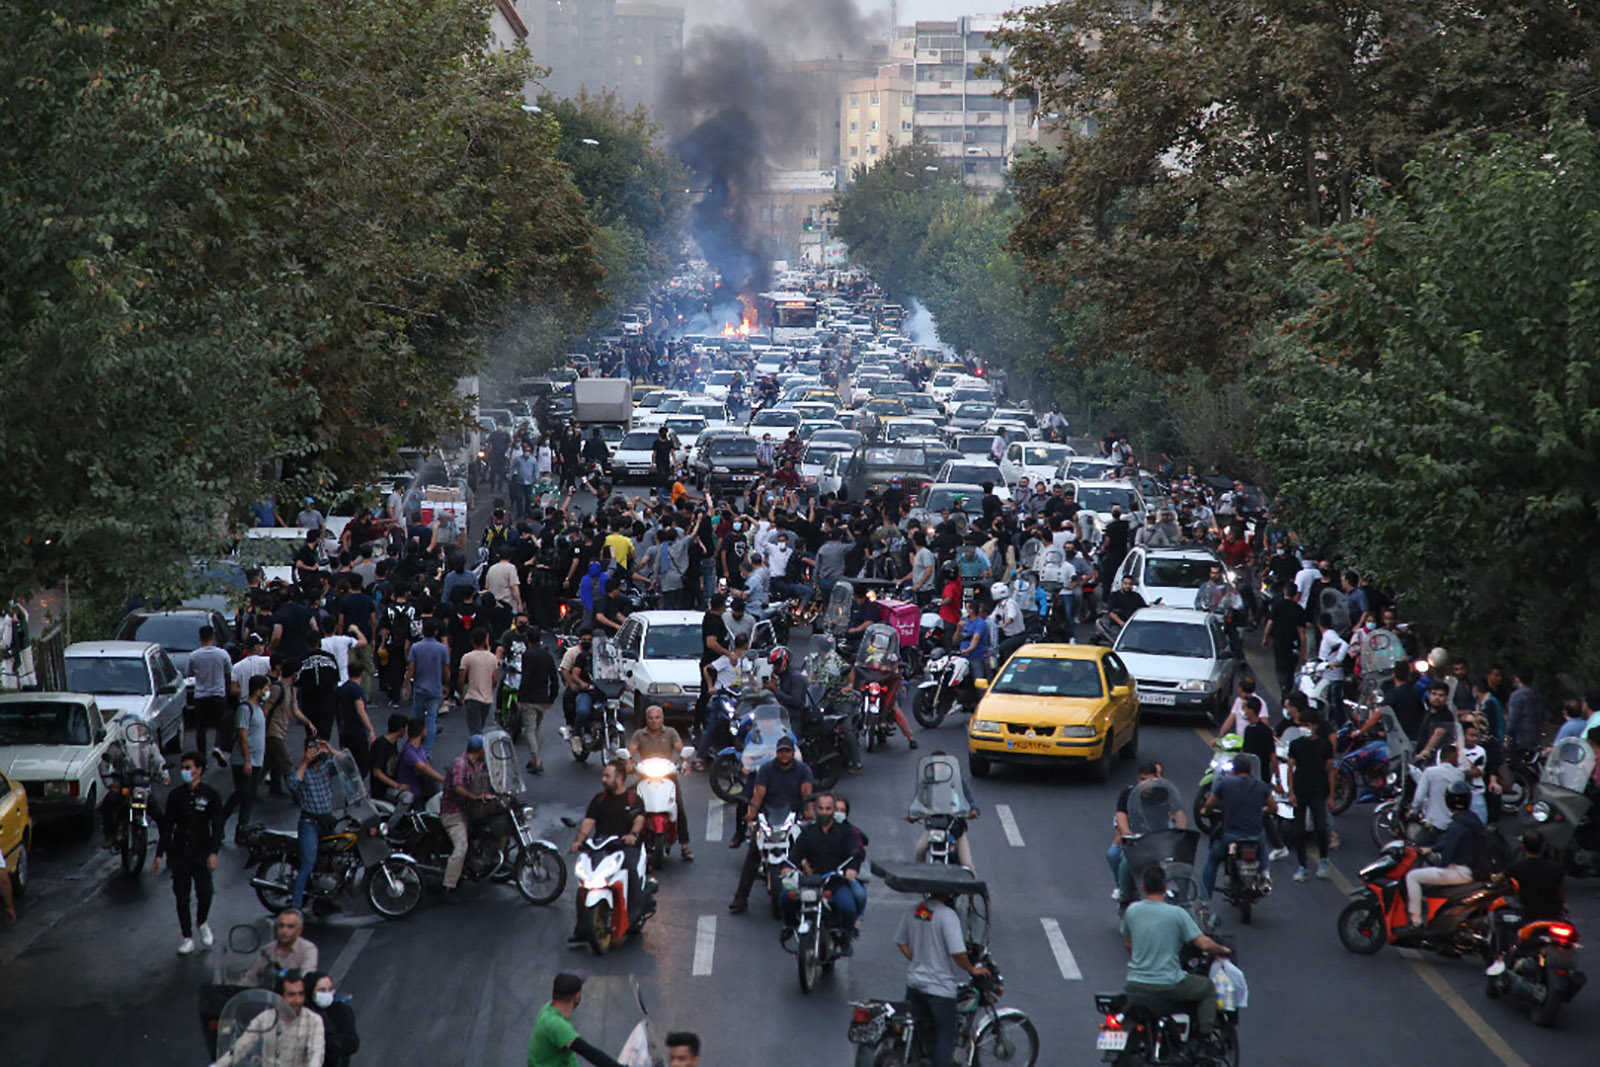 Protesters in the streets of Tehran days after Mahsa Amini died in police custody, September 21, 2022